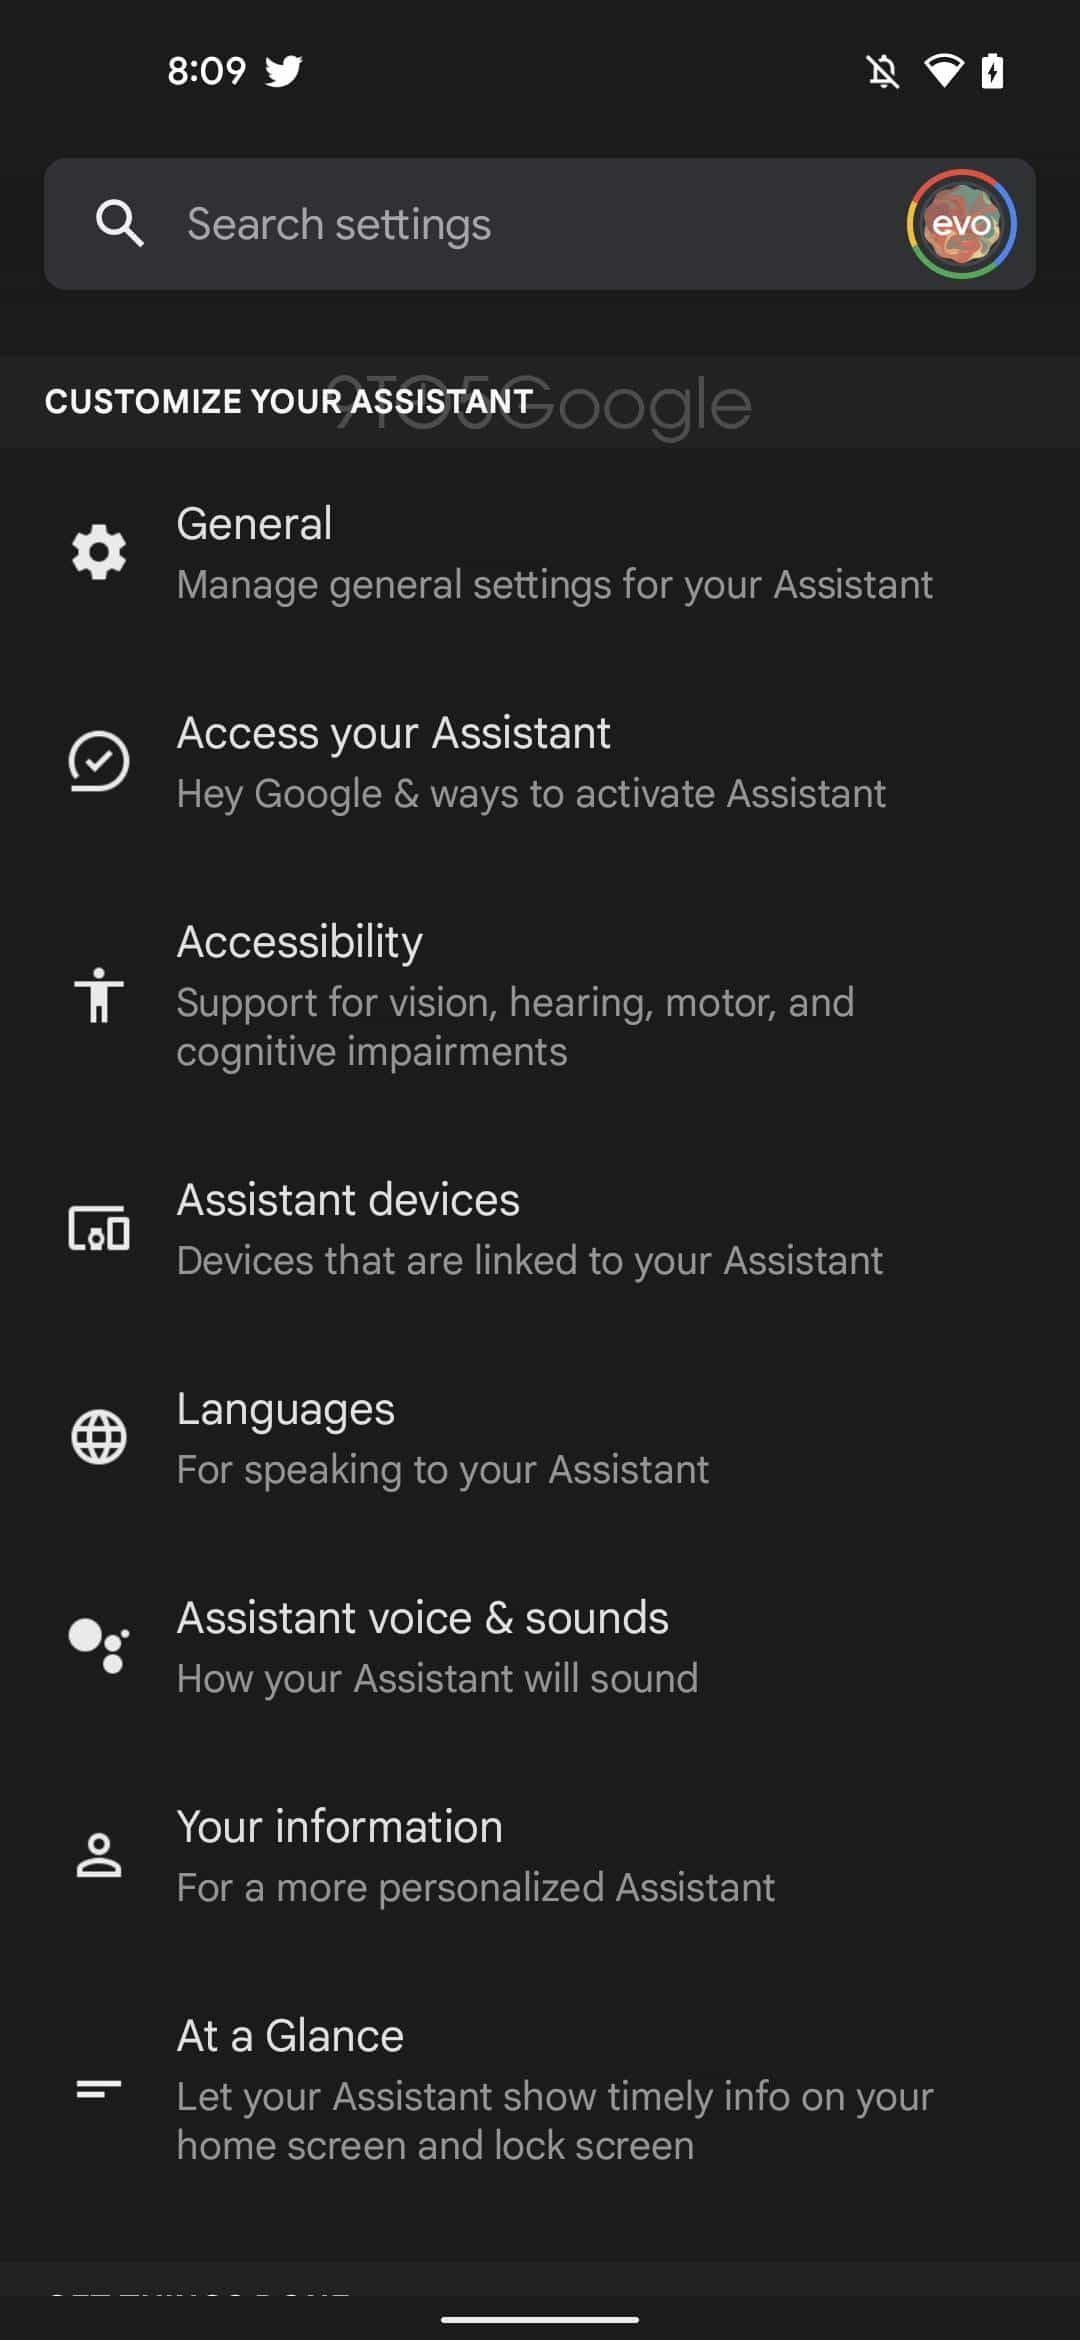 Google-Assistant-settings-redesign-2022-1